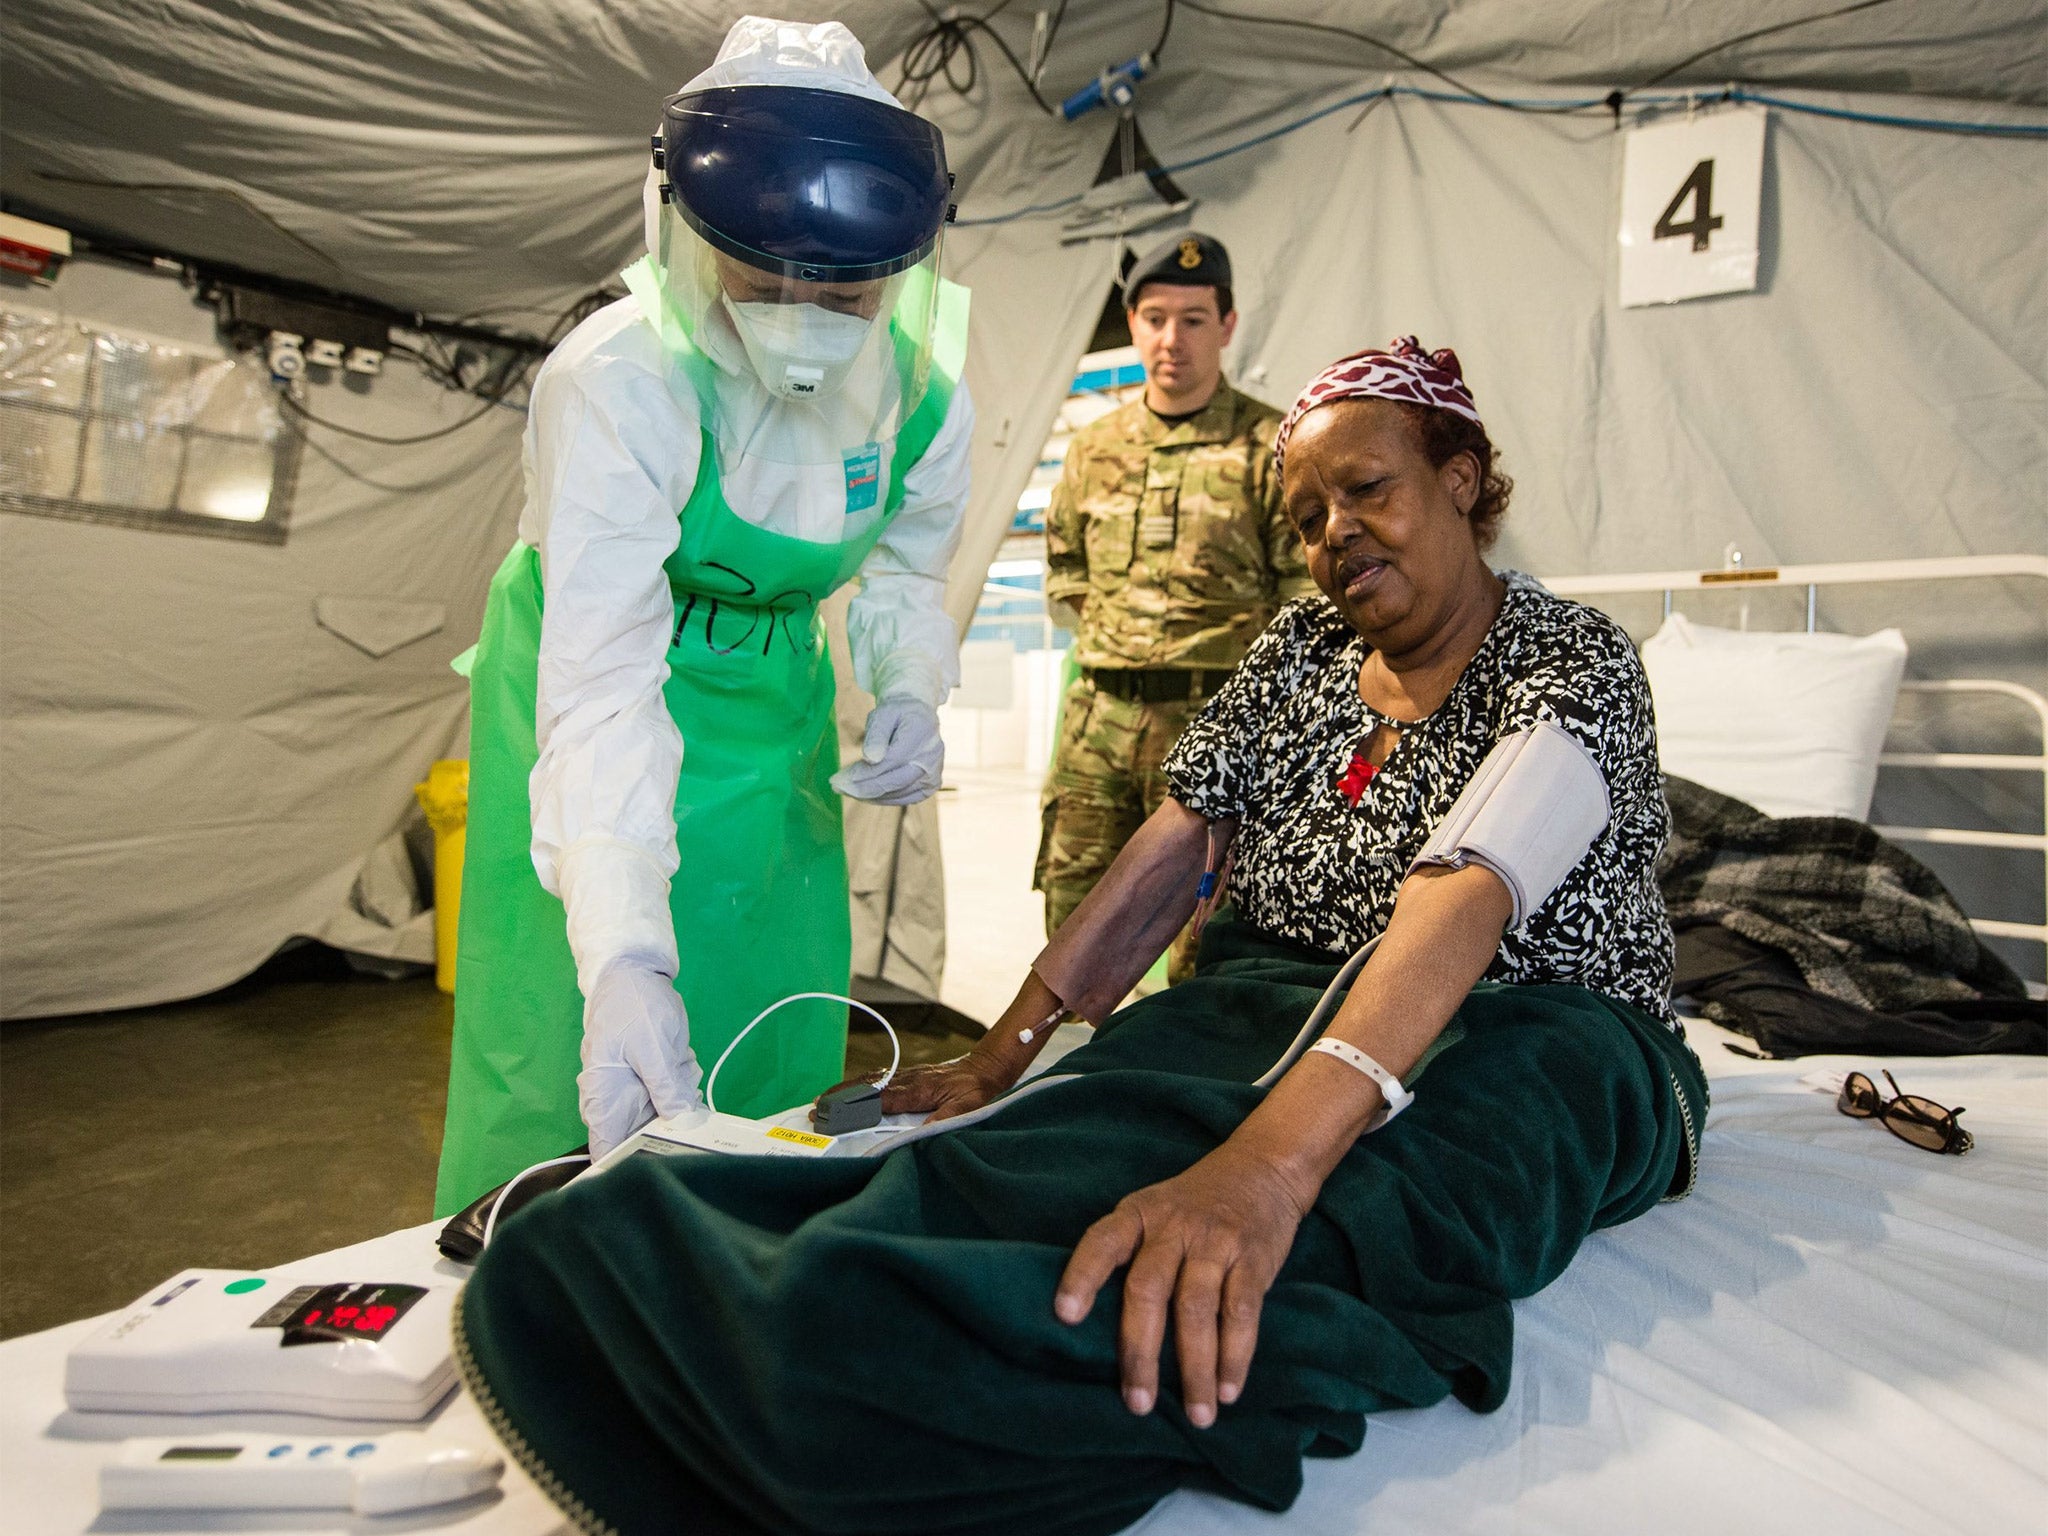 A military exercise for deployment to treat Ebola, in Sierra Leone, at the Army Medical Services training centre in Strensall, earlier this week